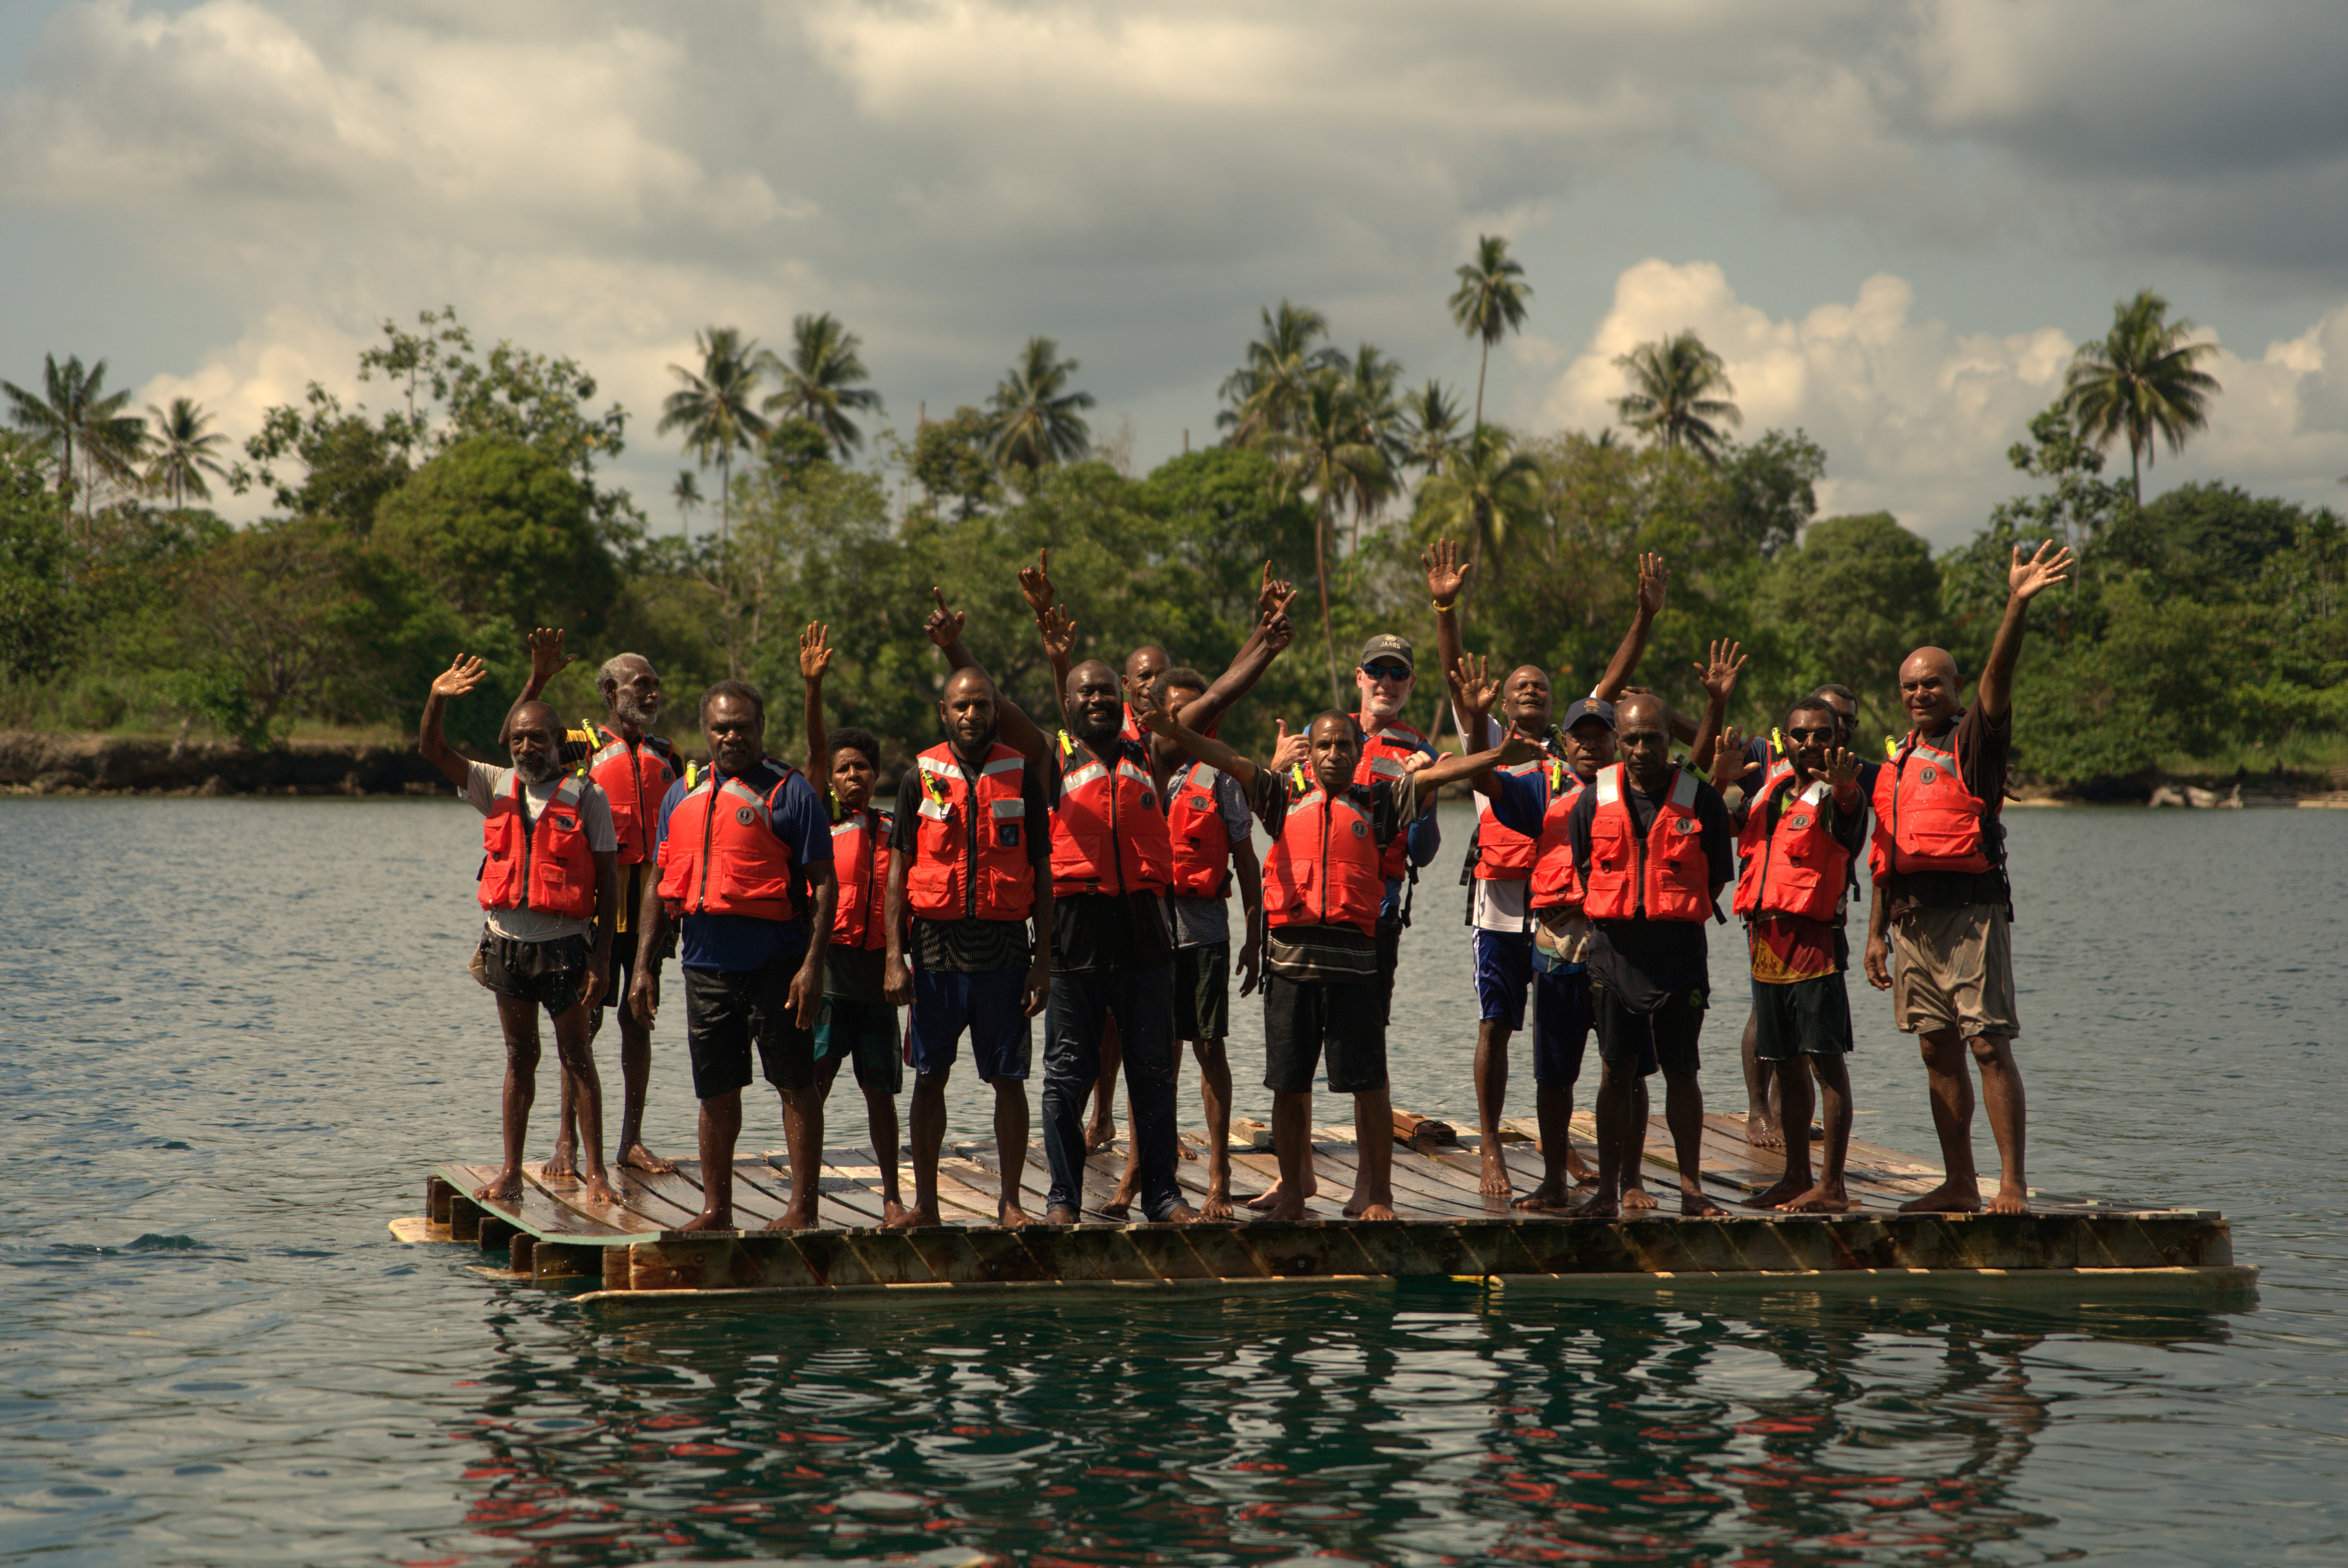 A group of Papua New Guineans with life jackets stand with an American on a floating platform in the water while waving at the camera